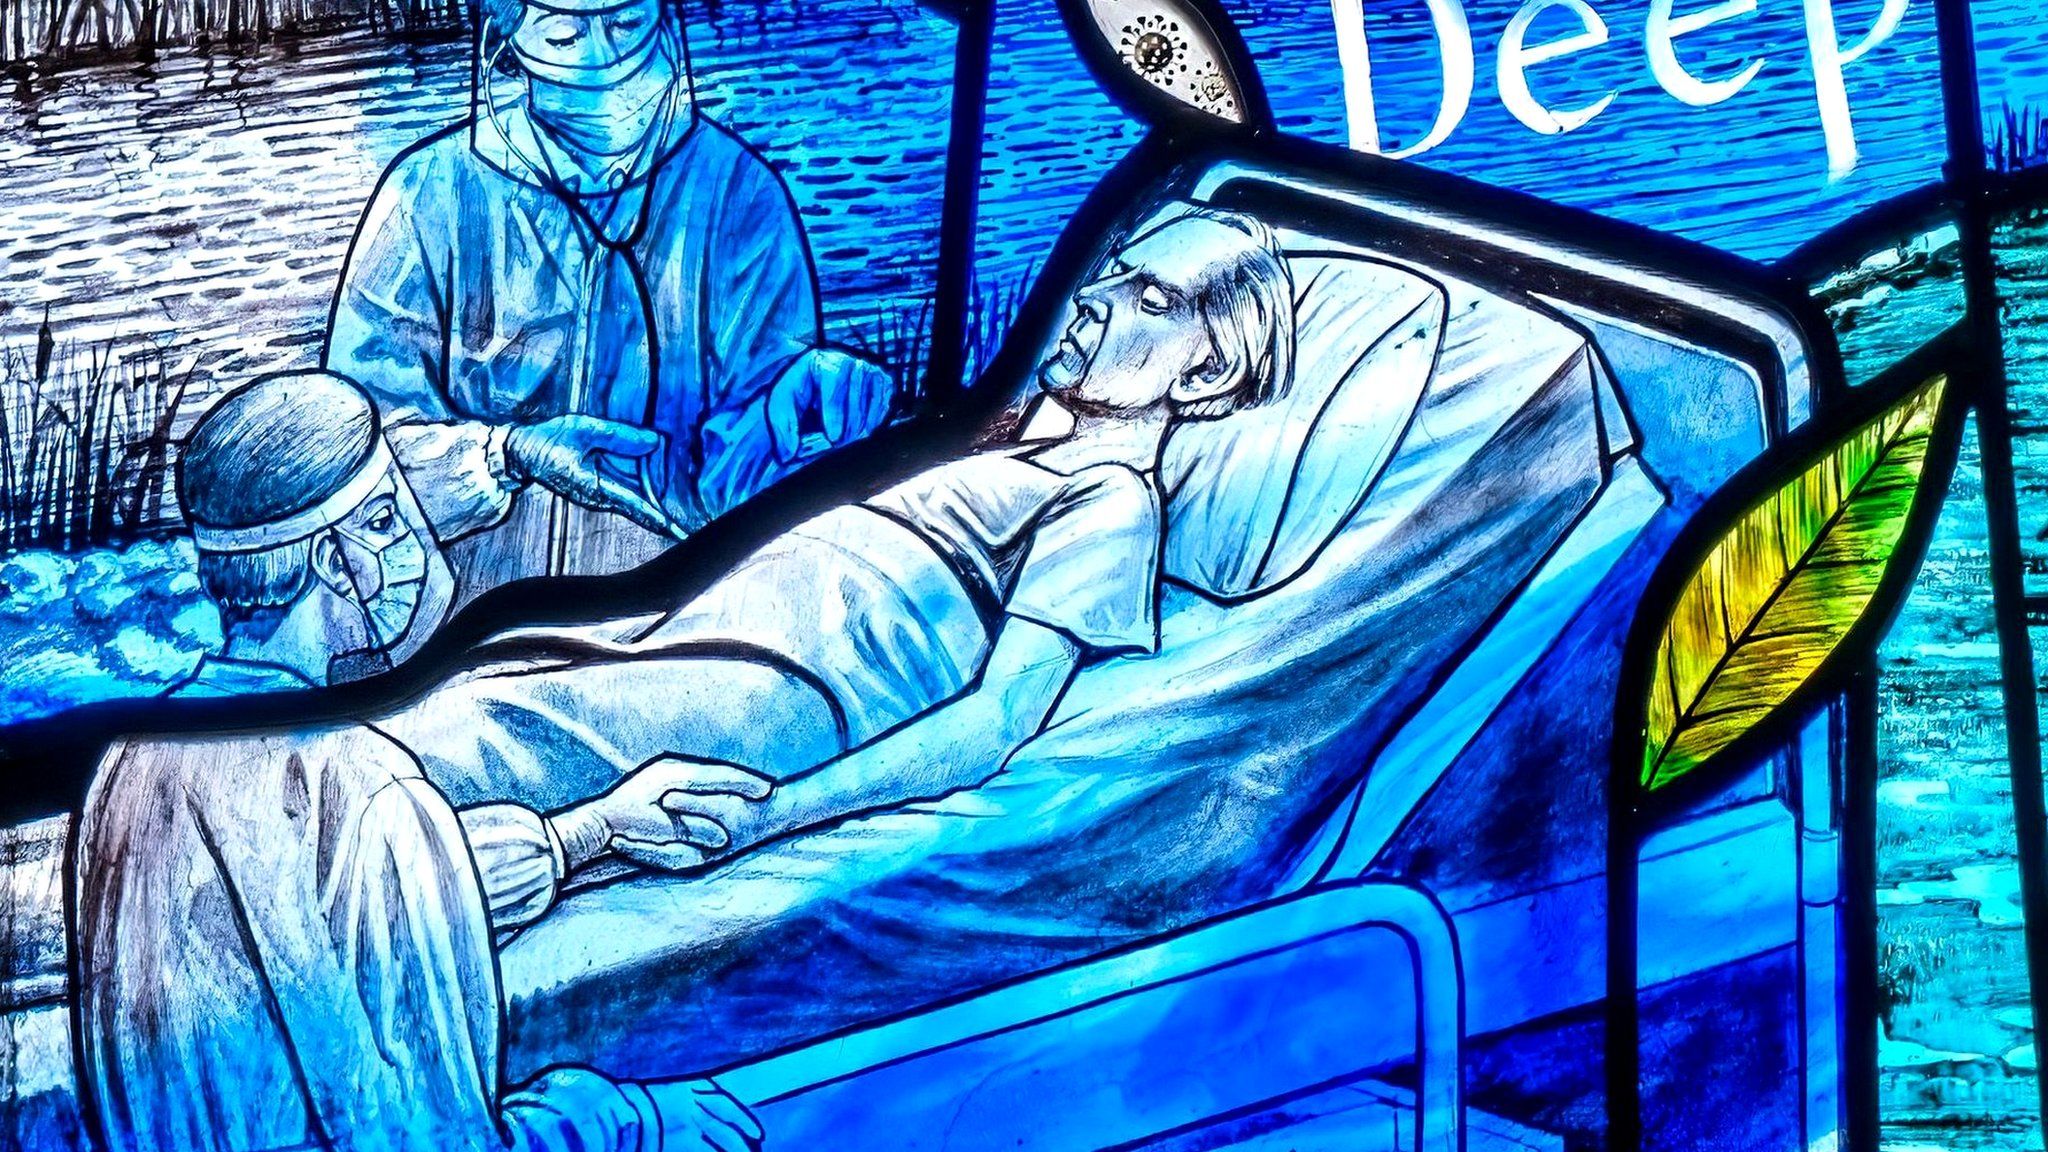 A scene from the stained glass window showing a hospital patient and doctors in PPE.